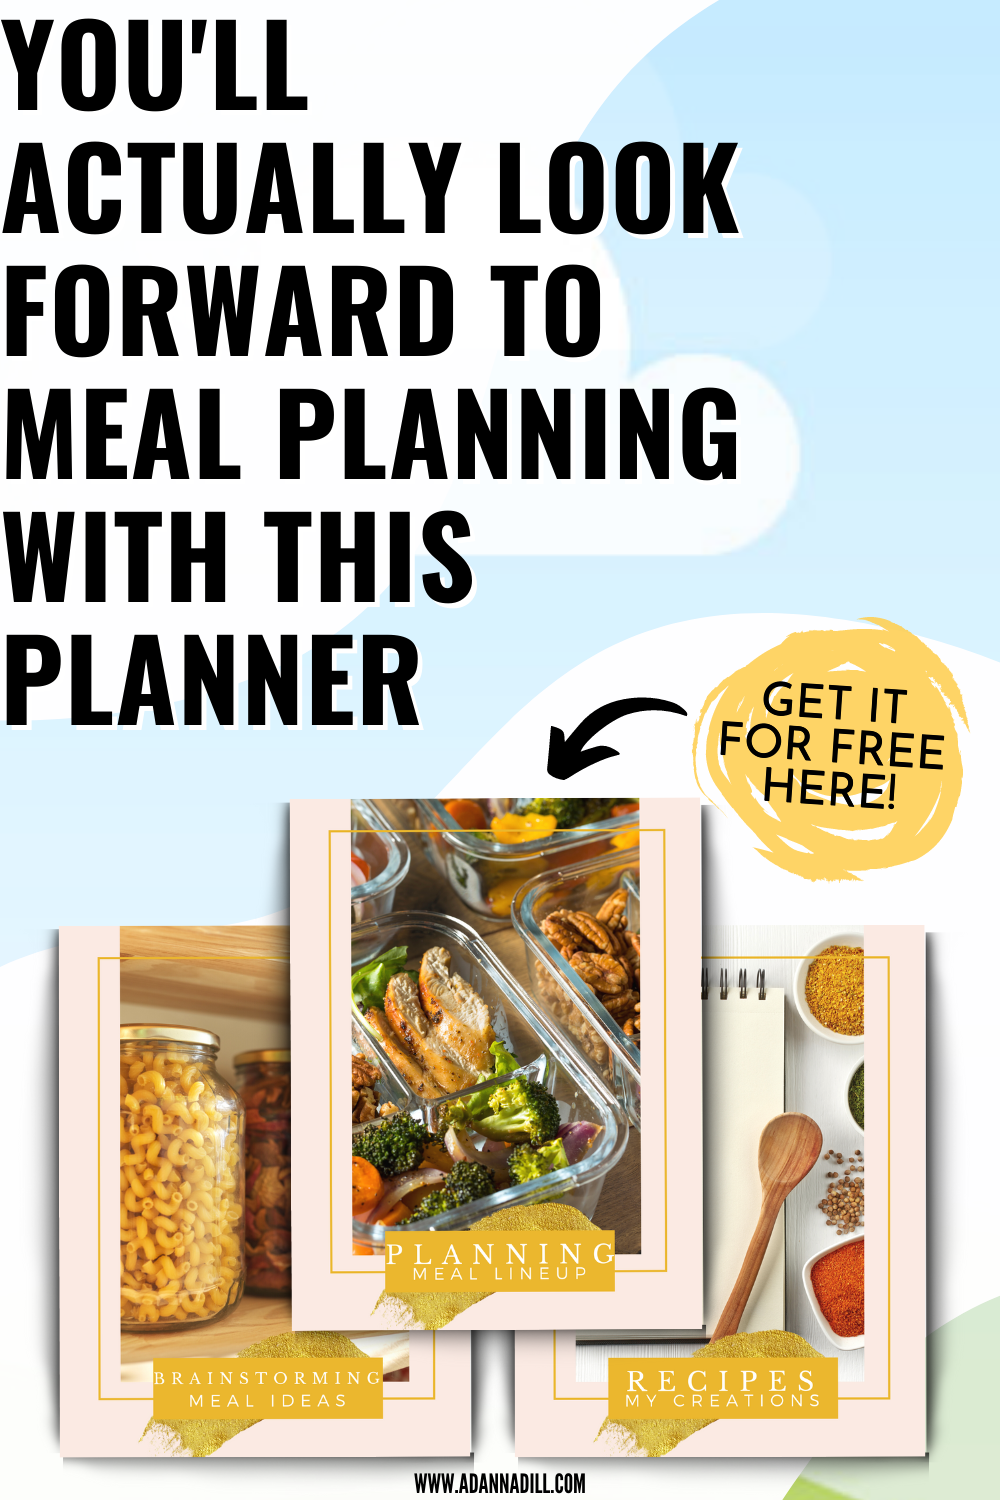 Free meal planning planner